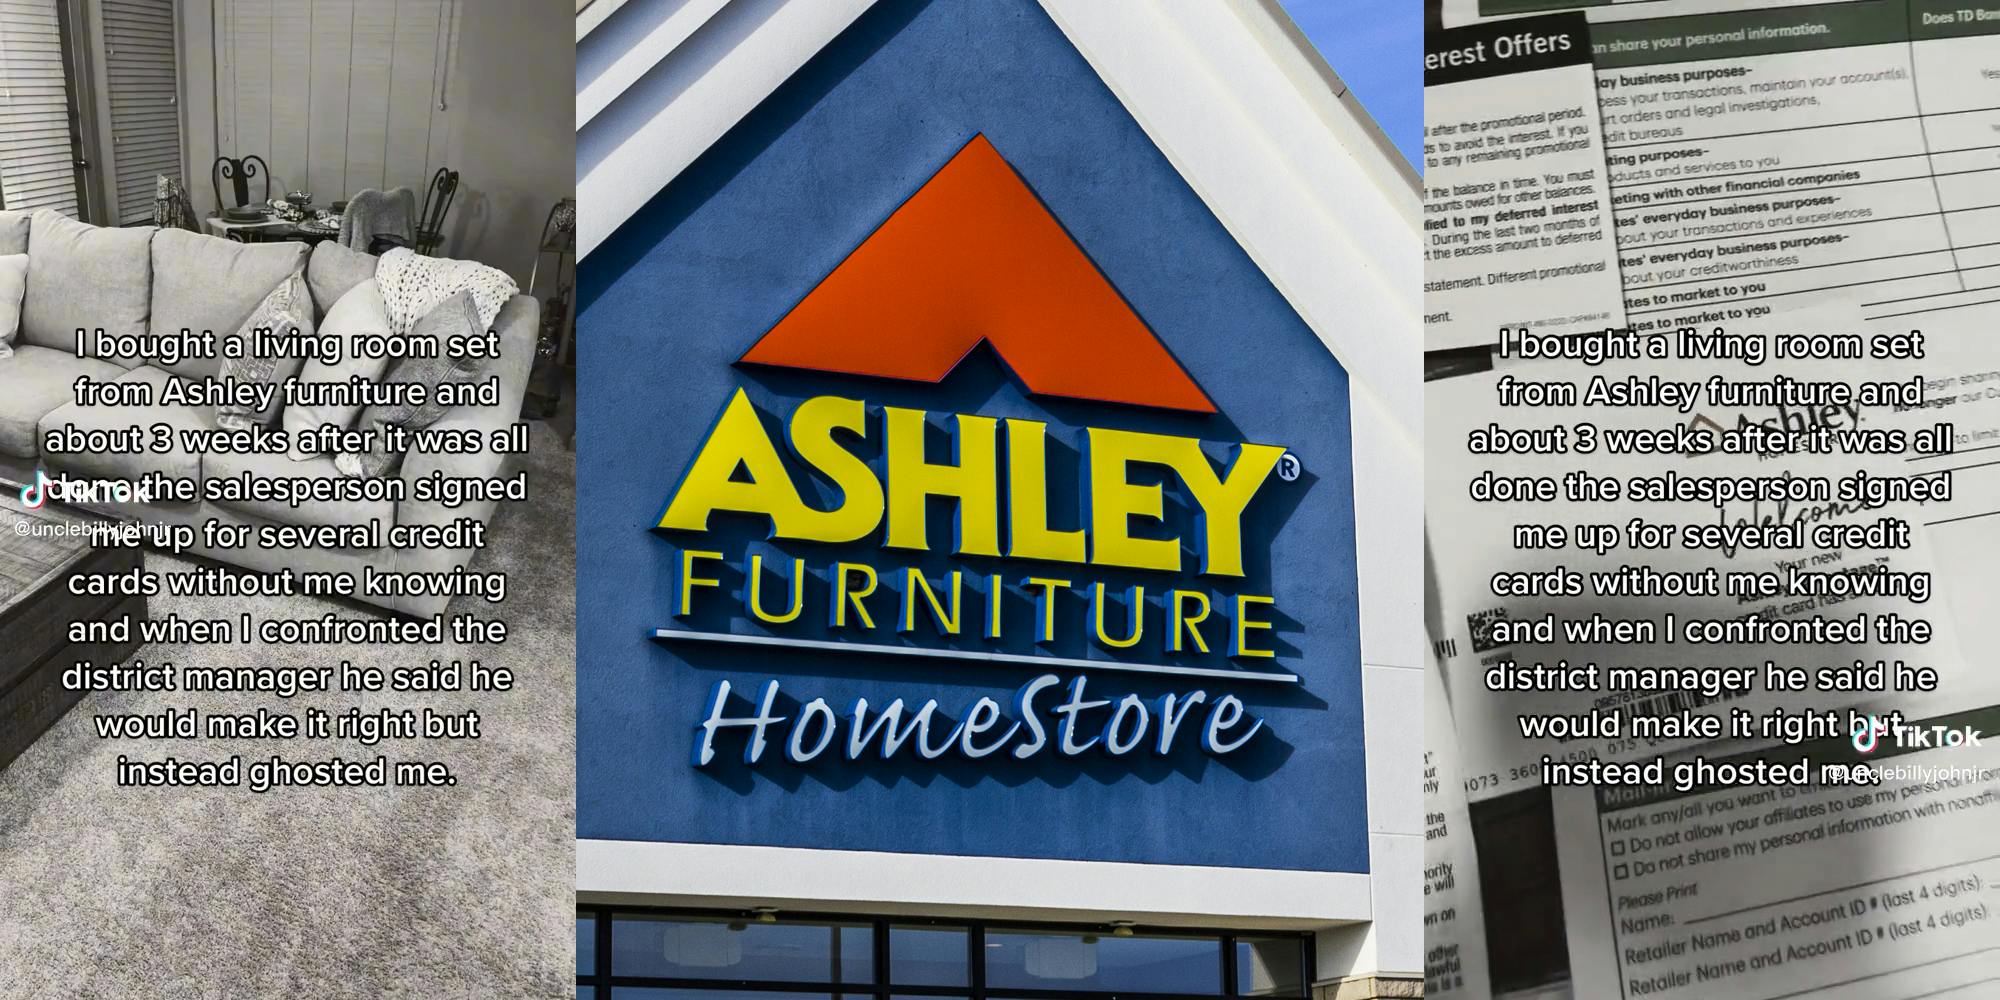 Customer Says Ashley Furniture Signed Him Up For Credit Cards